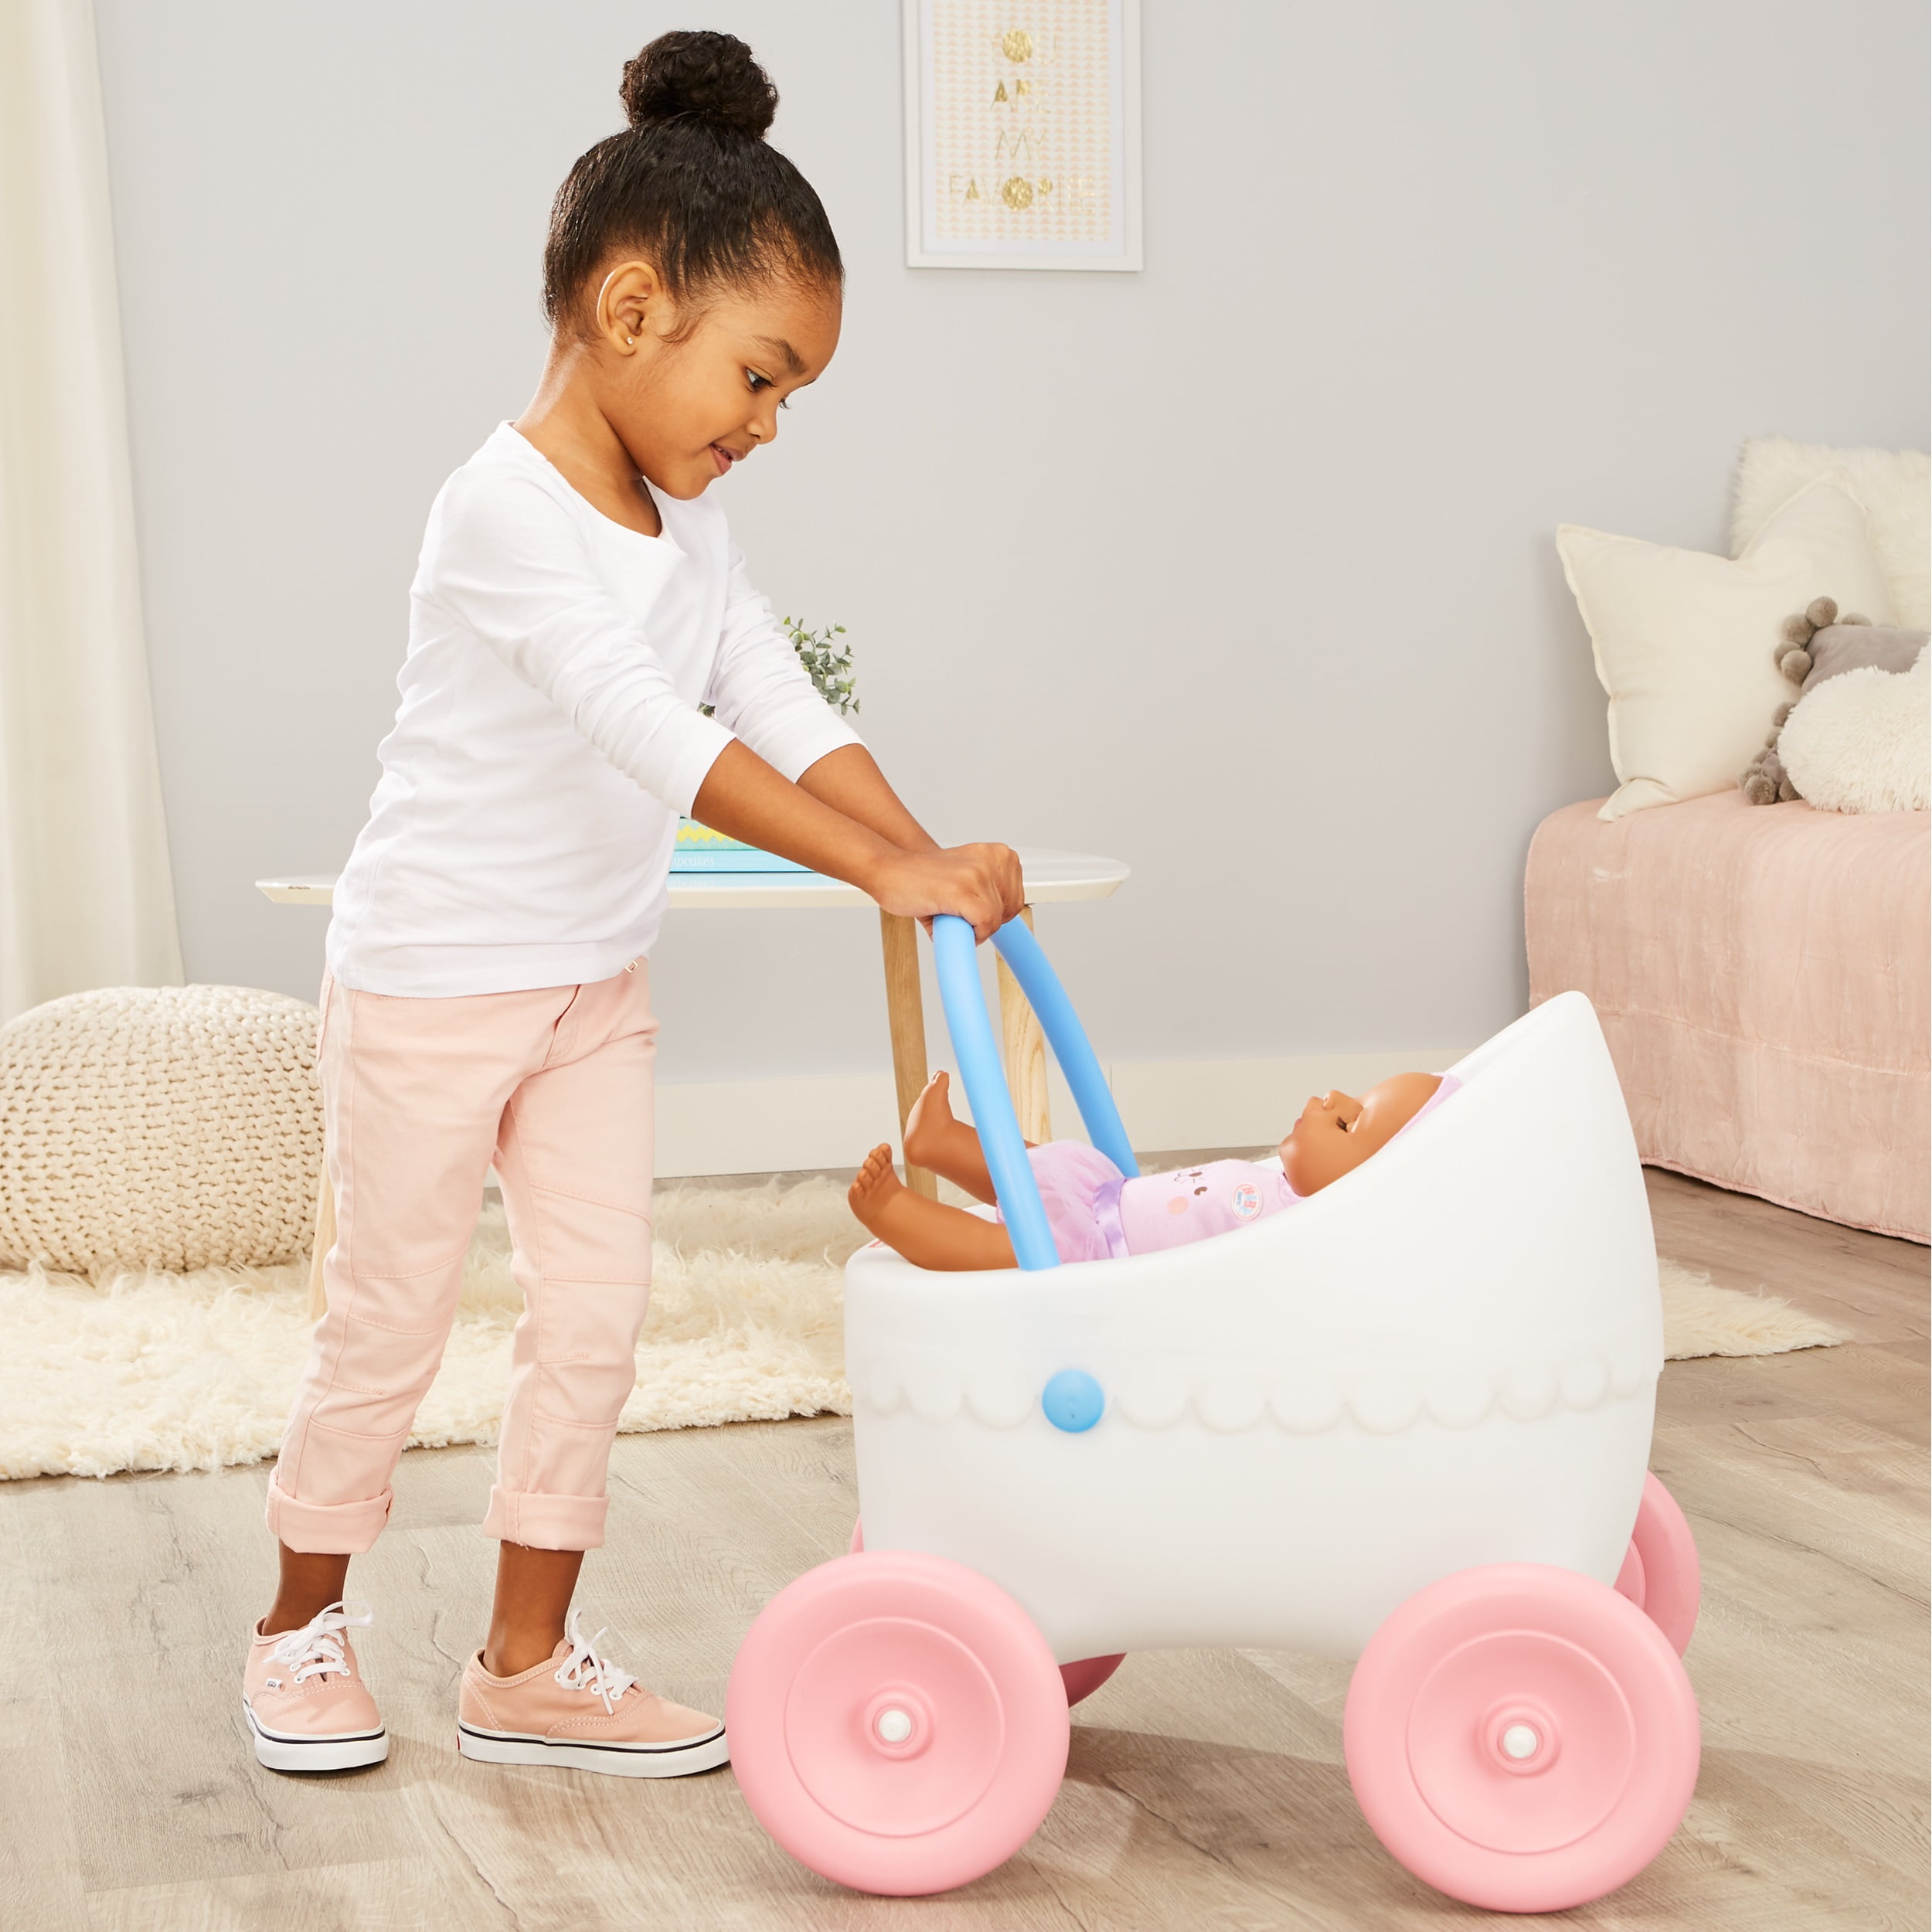 little tikes doll carriage